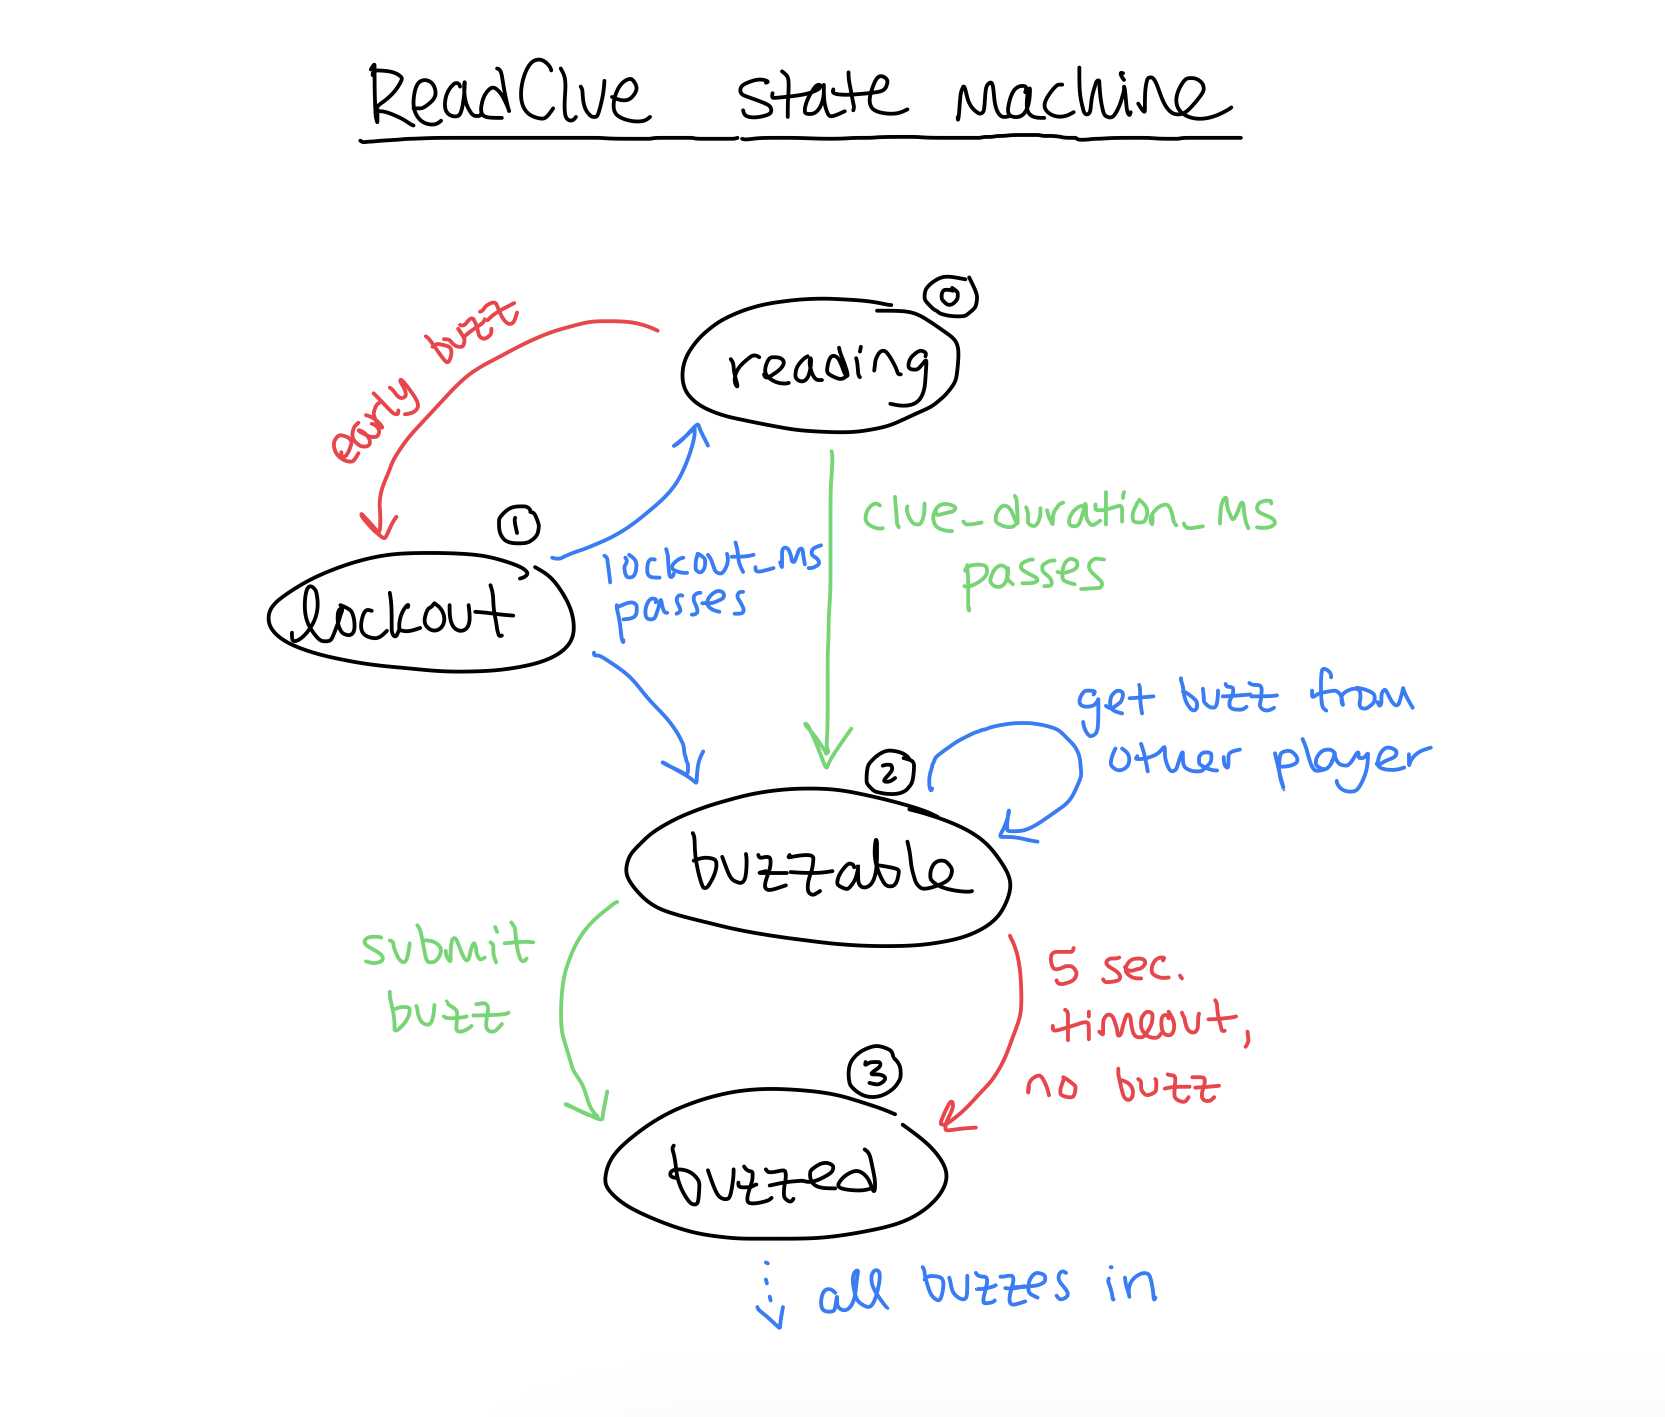 Simplified state machine for a client in the "reading clue" room state